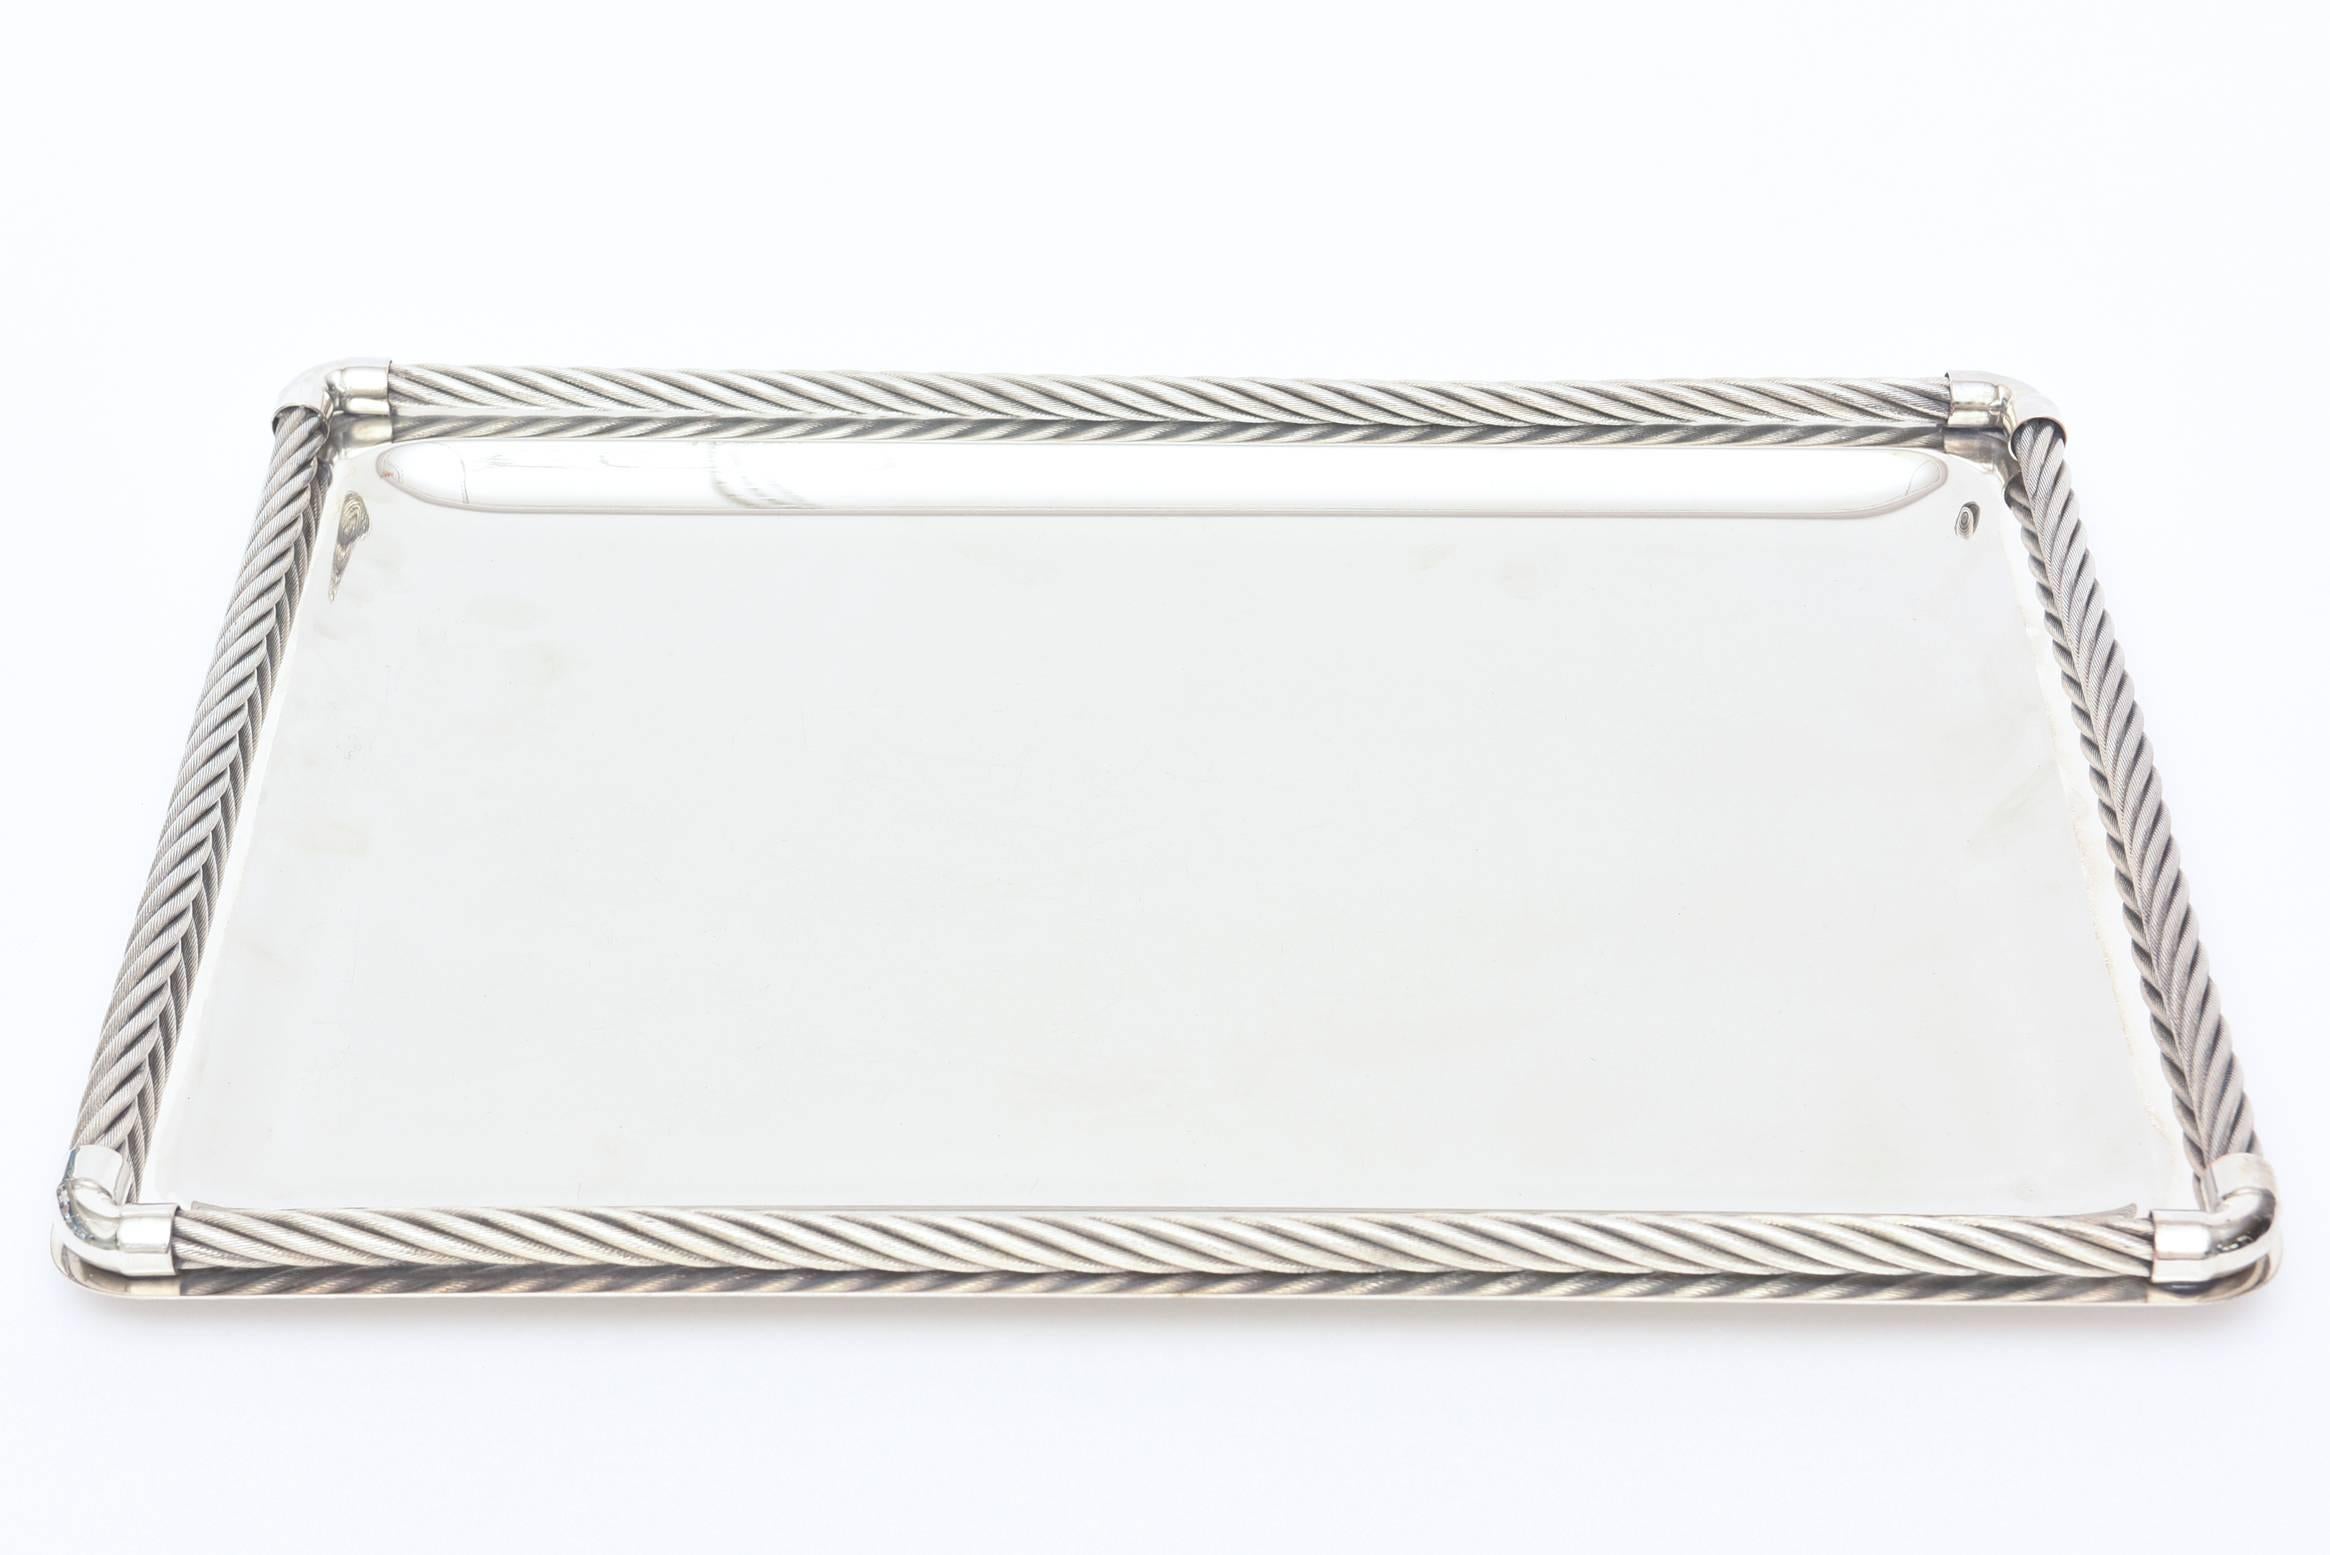 This wonderful and versatile  Italian Gucci silver plate tray has both modern and traditional elements to it. The braided /rope borders done in silver-plate add dimension. The  interior center is silver-plate also.
It is signed Co 10 Gucci made in